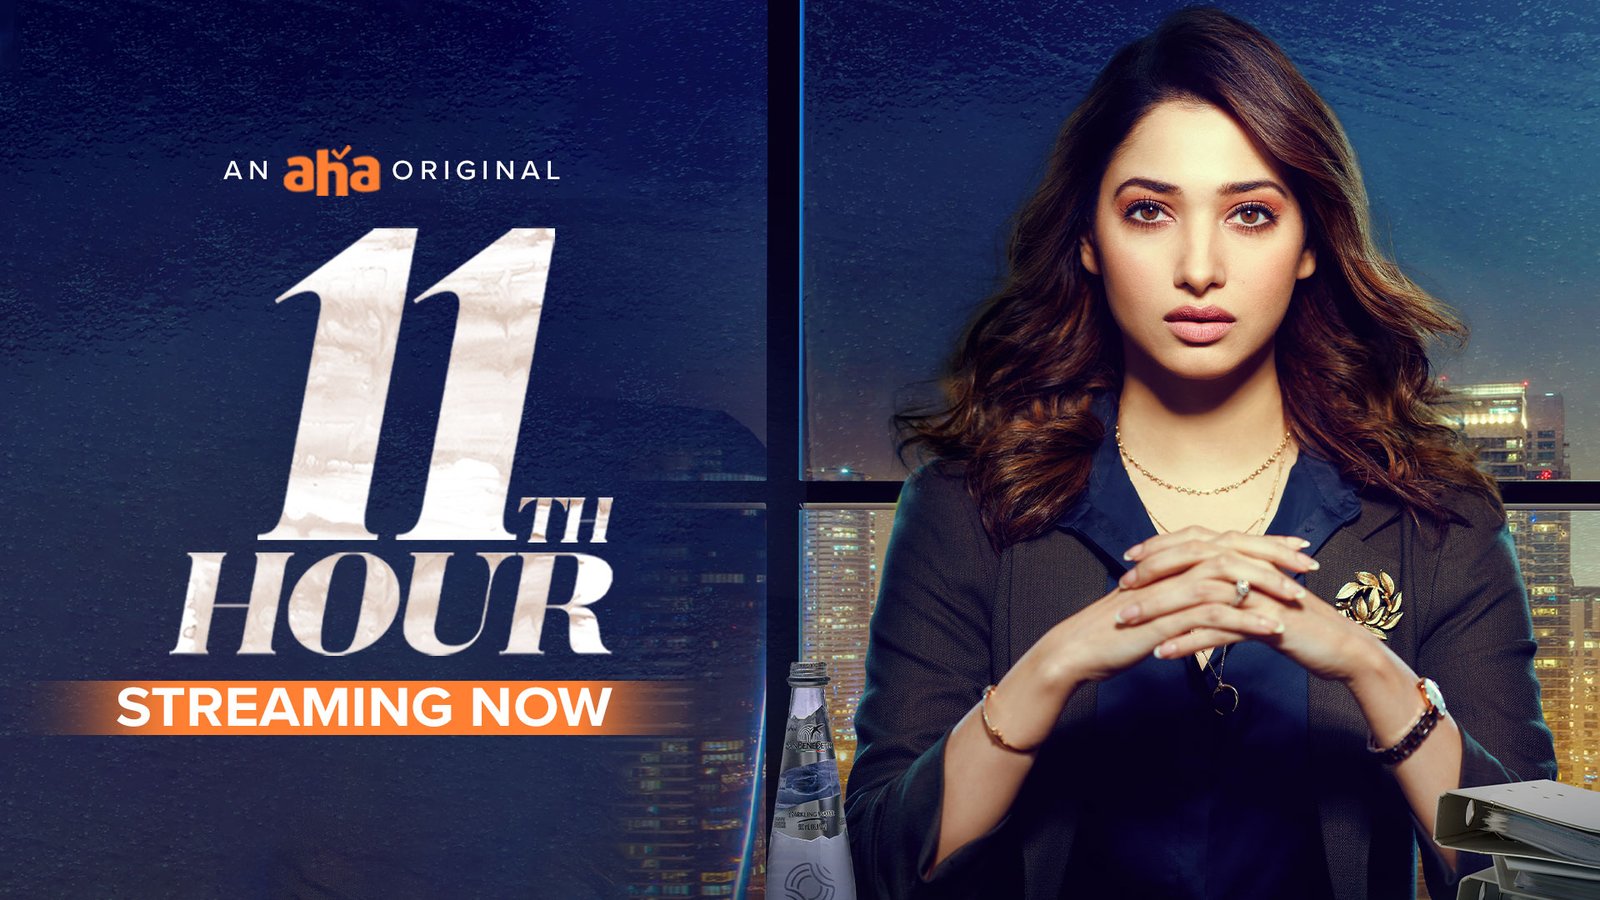 11th Hour Web Series Watch Online in HD Quality on Aha